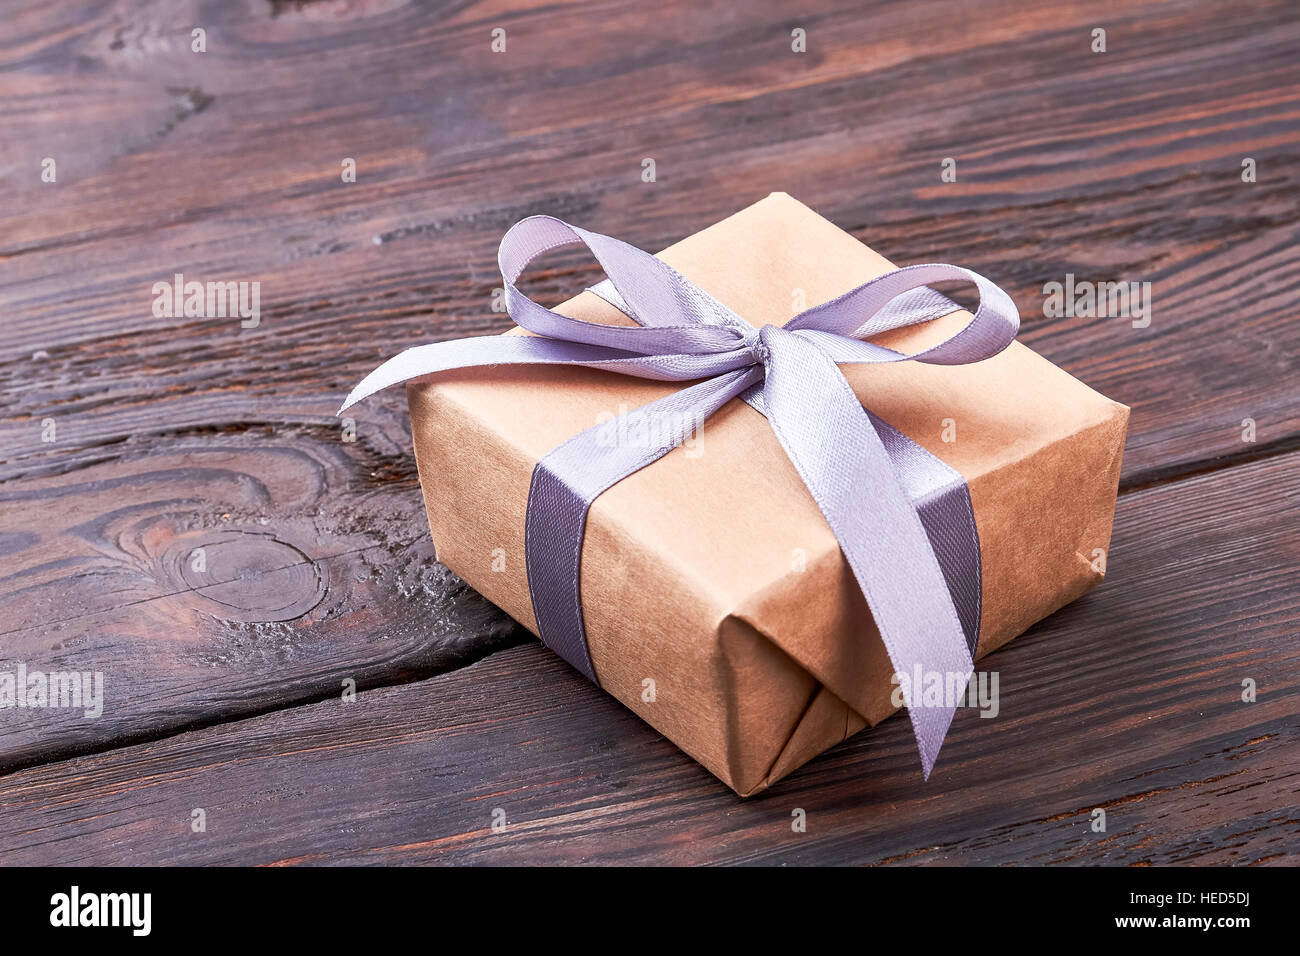 Present box on wooden surface. Stock Photo